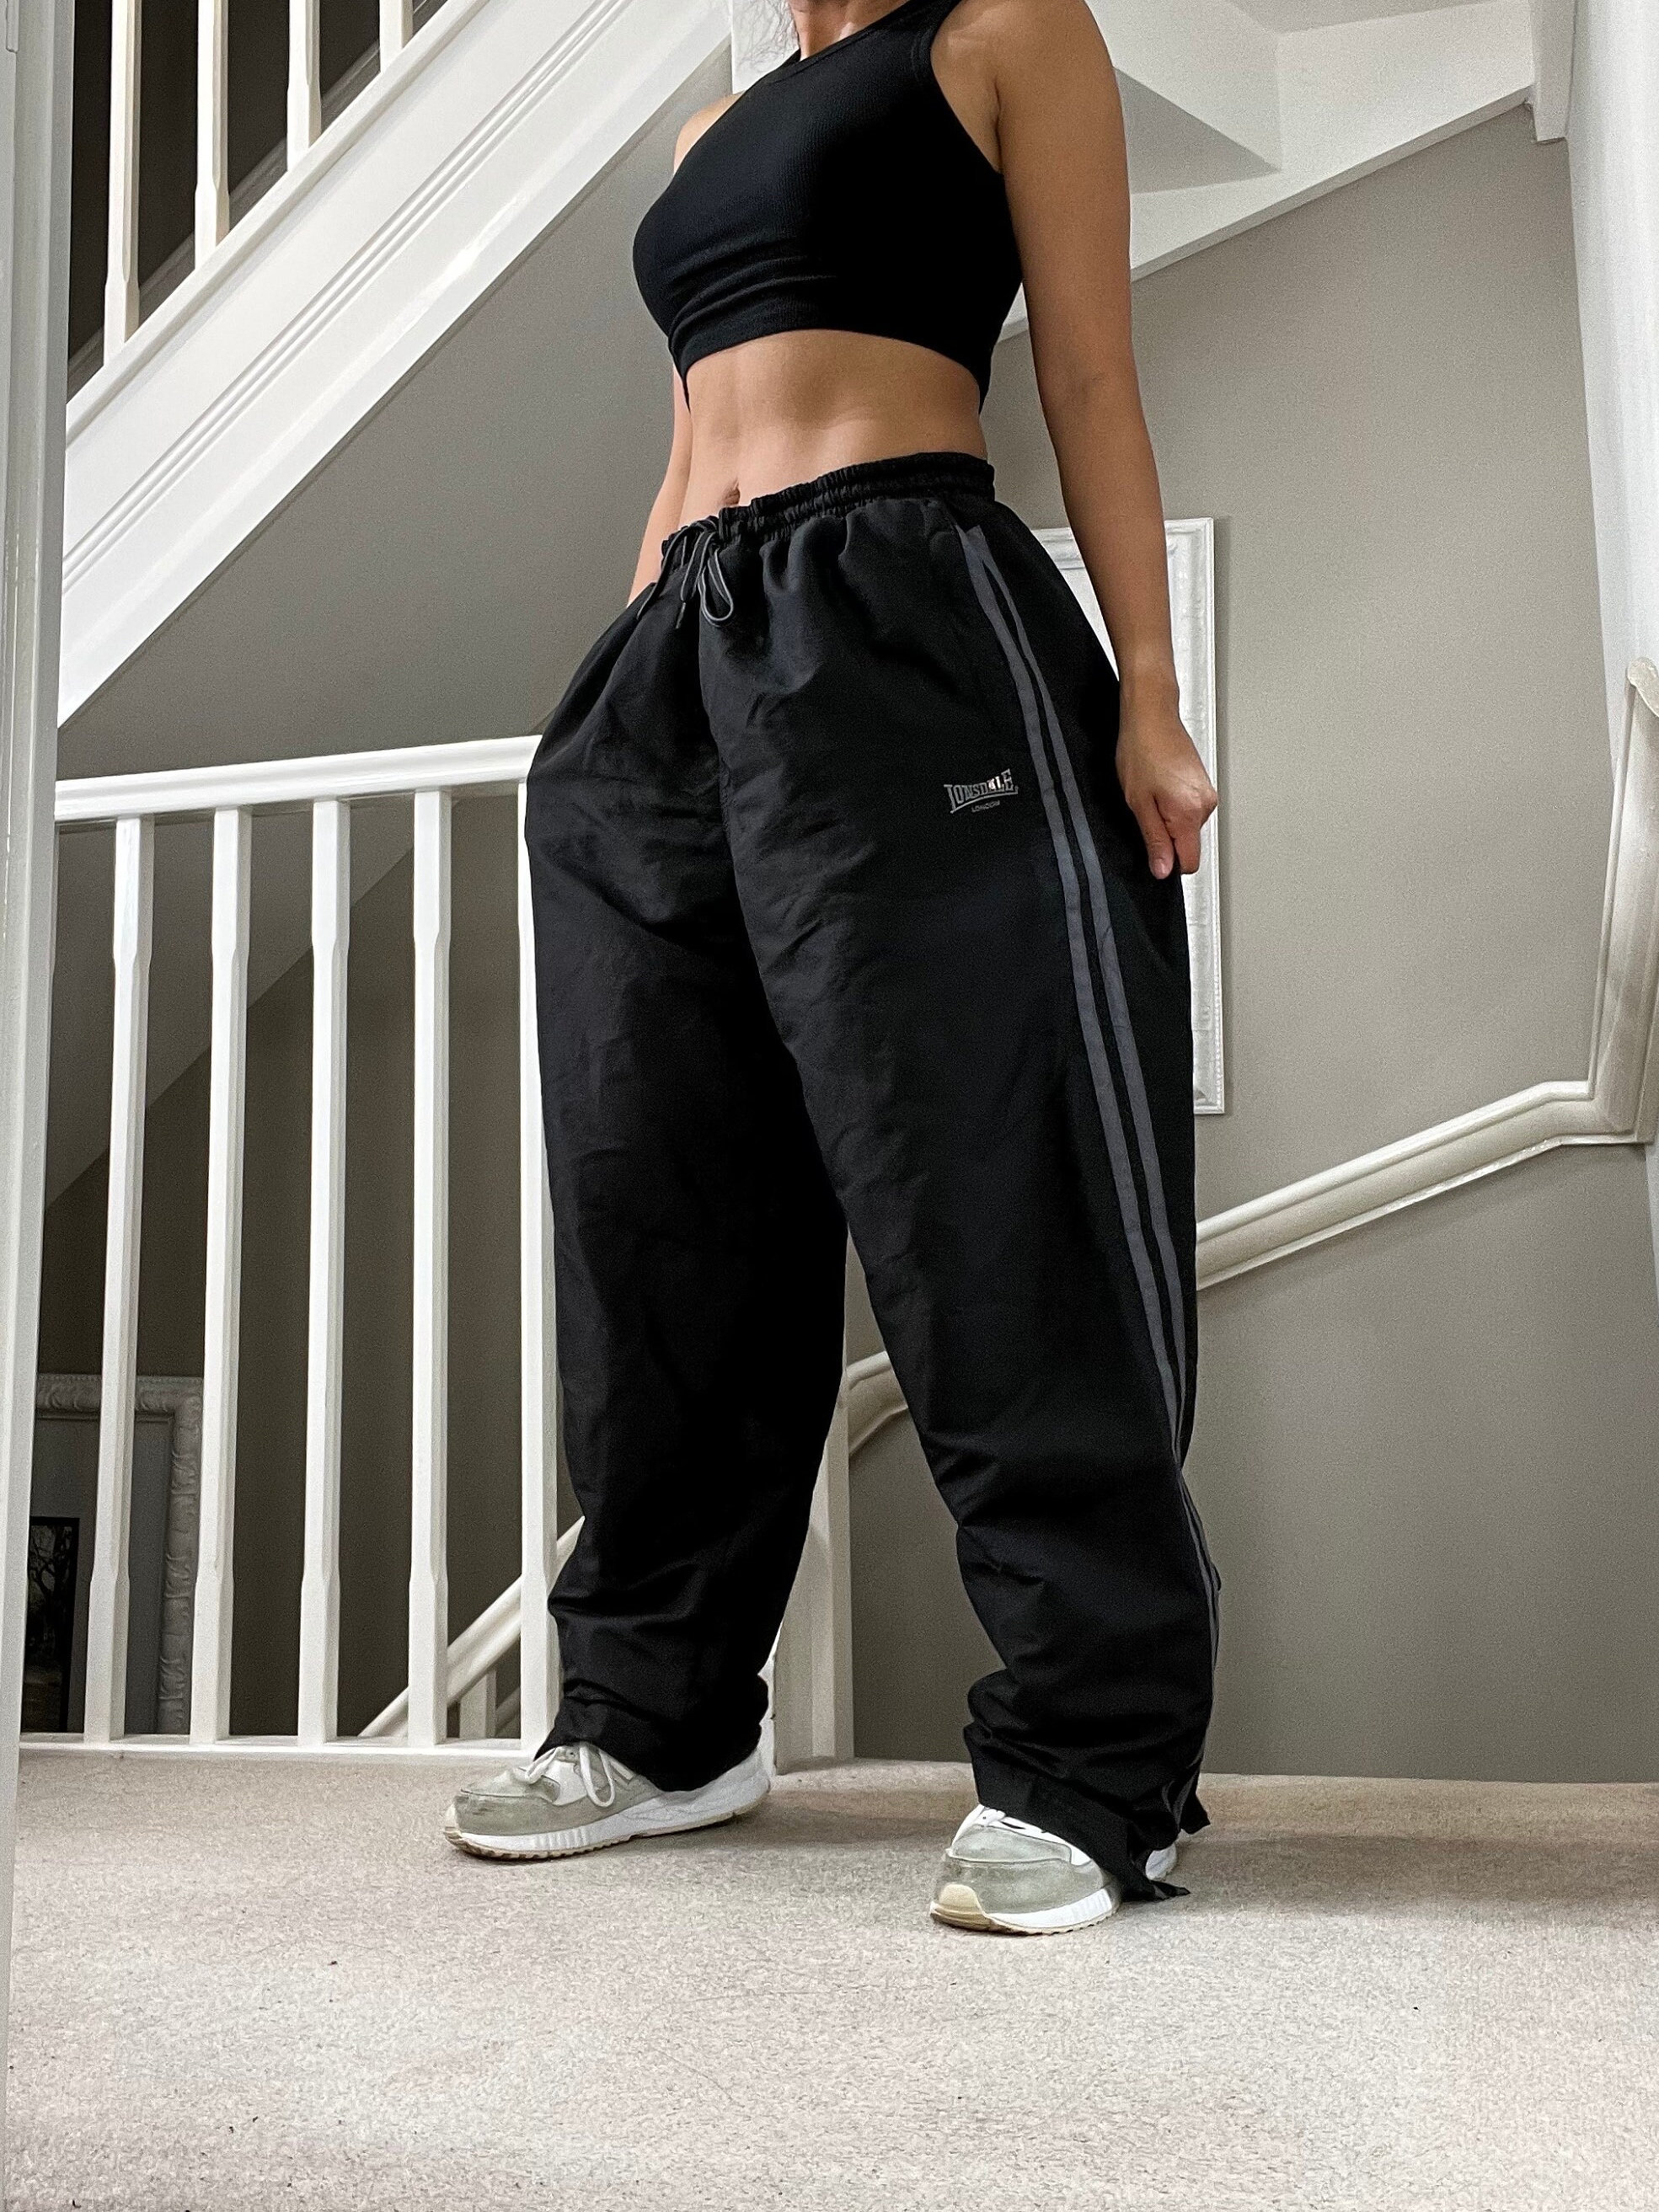 Lonsdale Oversized Fit Track Pants Size XL Unisex in Black